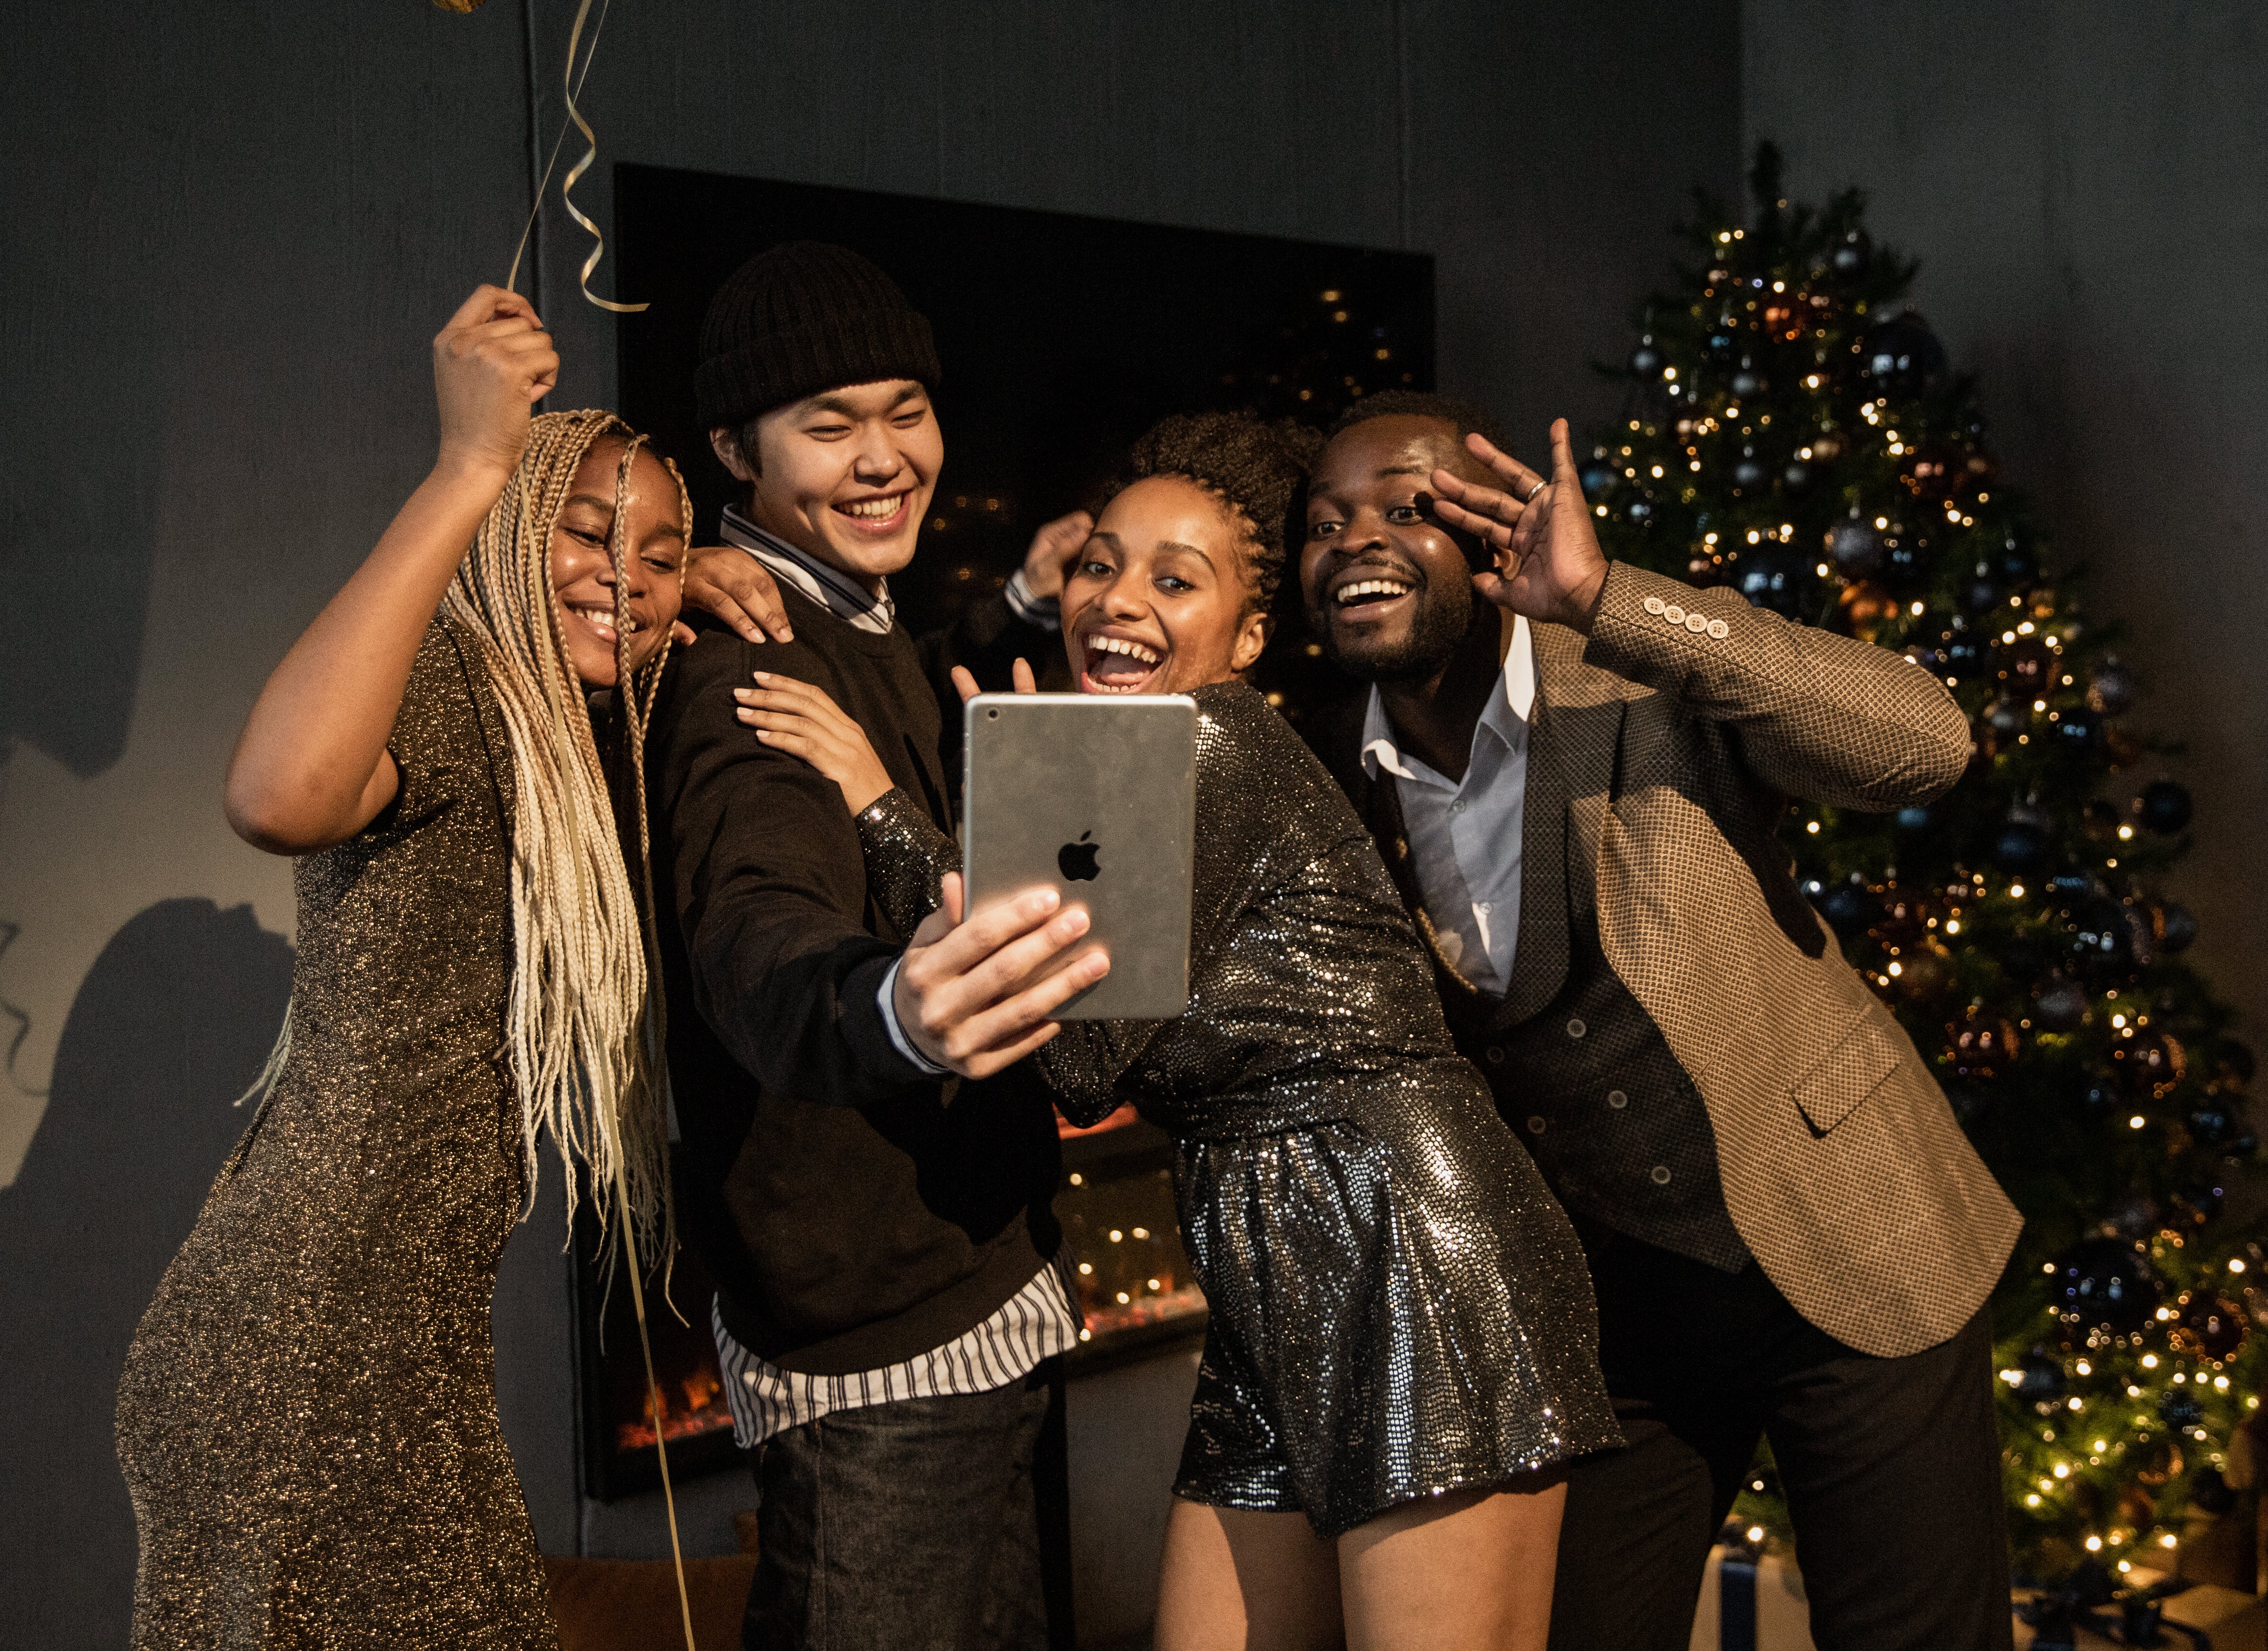 Virtual Holiday Party Ideas for Work Spread Cheer and Boost Morale 